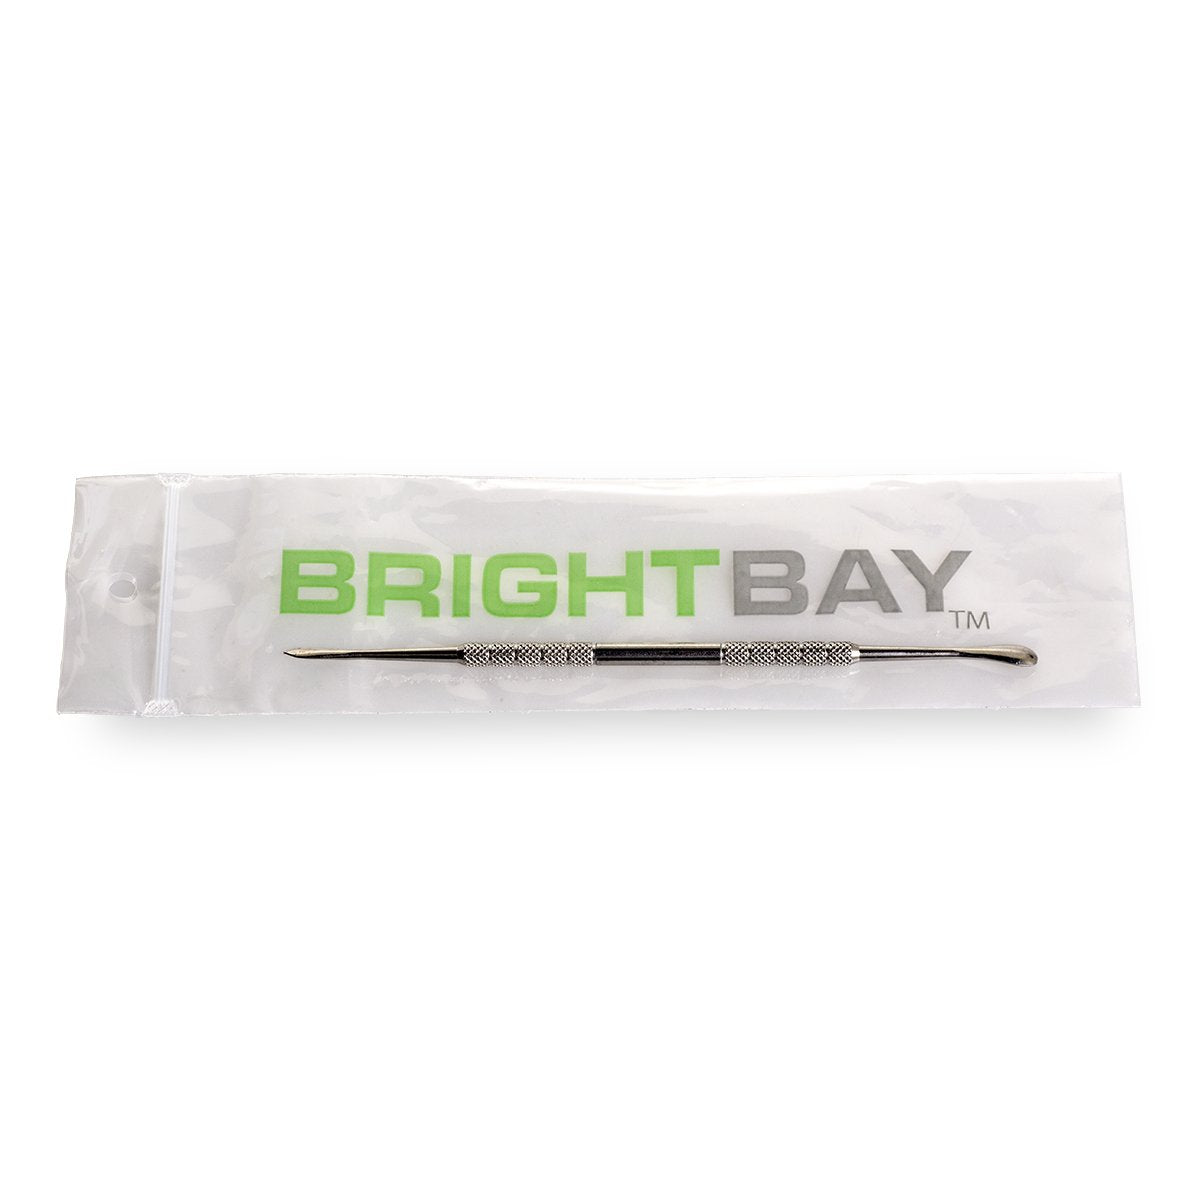 Brightbay Stainless Steel Dabber 160Mm Chrome Accessories